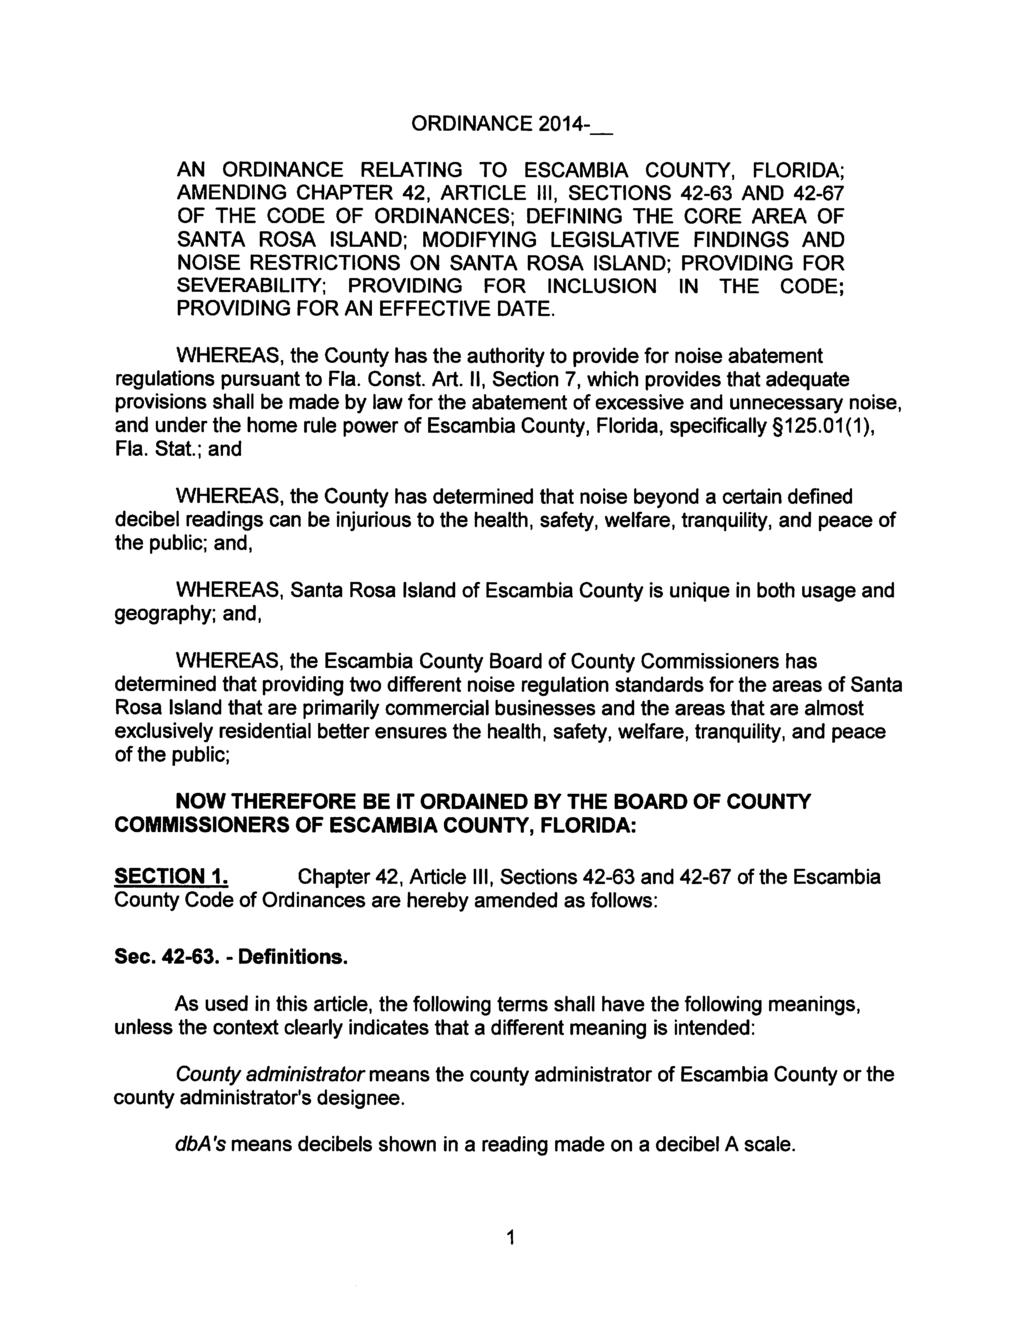 ORDINANCE 2014-_ AN ORDINANCE RELATING TO ESCAMBIA COUNTY, FLORIDA; AMENDING CHAPTER 42, ARTICLE III, SECTIONS 42-63 AND 42-67 OF THE CODE OF ORDINANCES; DEFINING THE CORE AREA OF SANTA ROSA ISLAND;